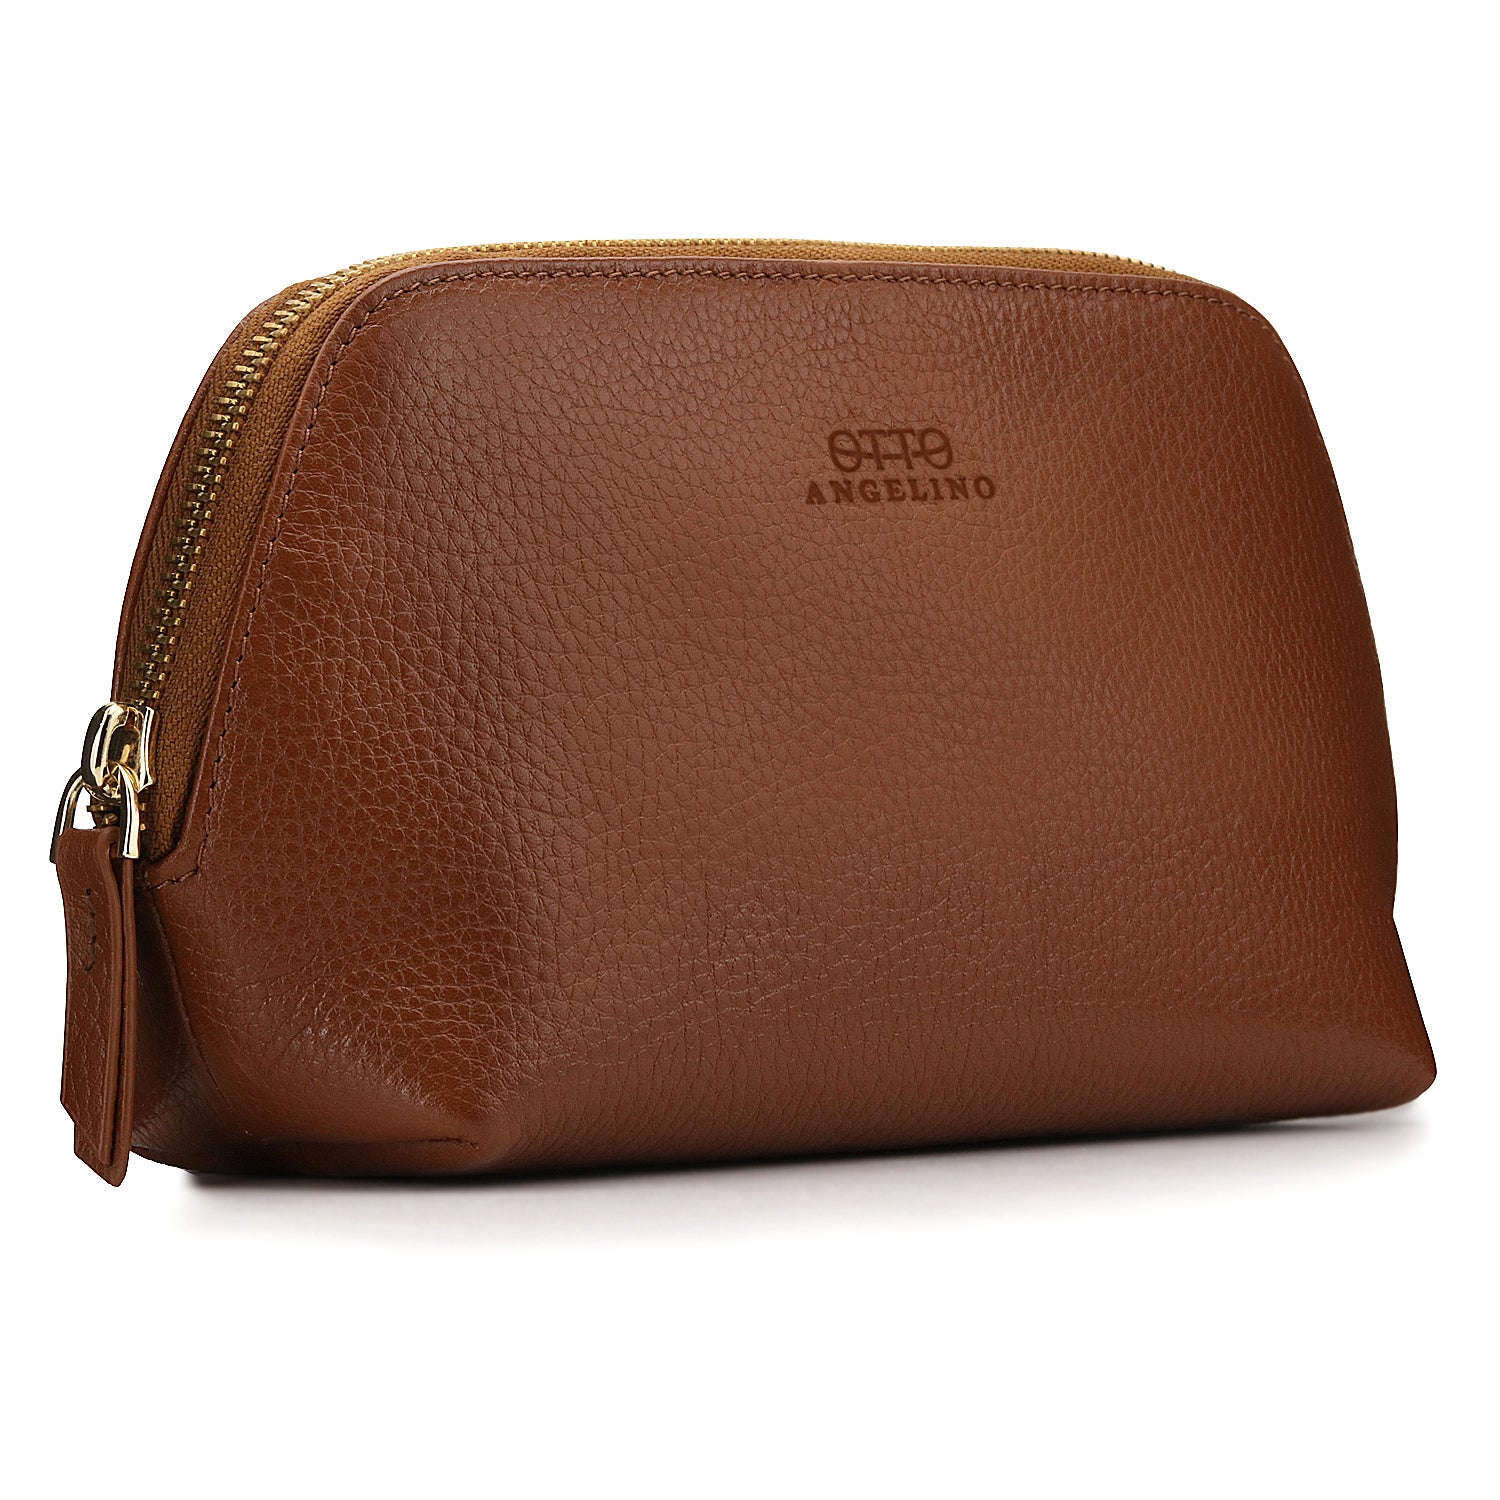 Make-up pouch - genuine leather - integrated mirror